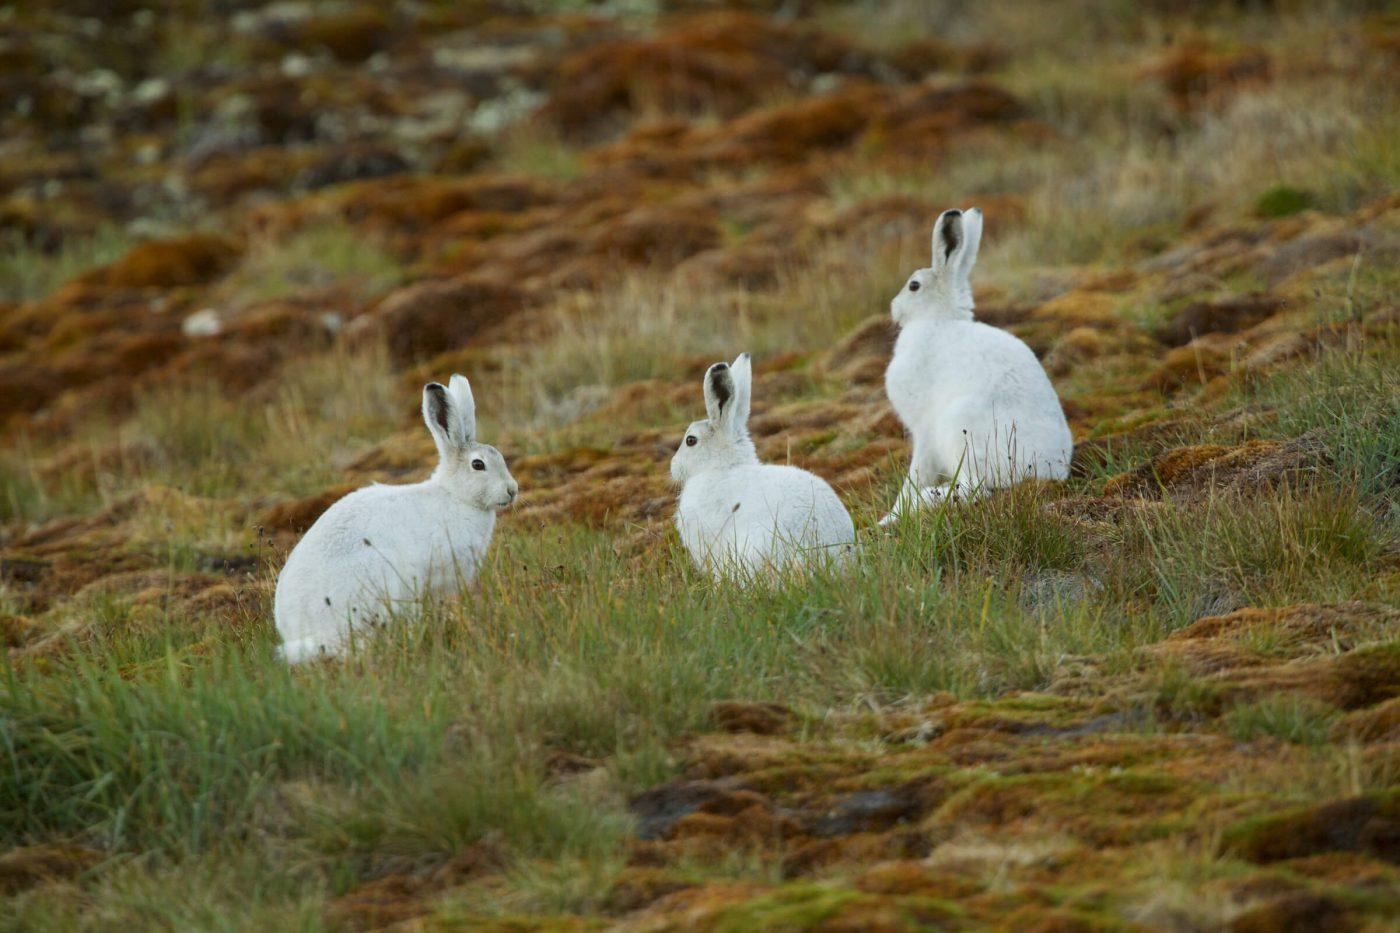 Three mountain hares in North Greenland